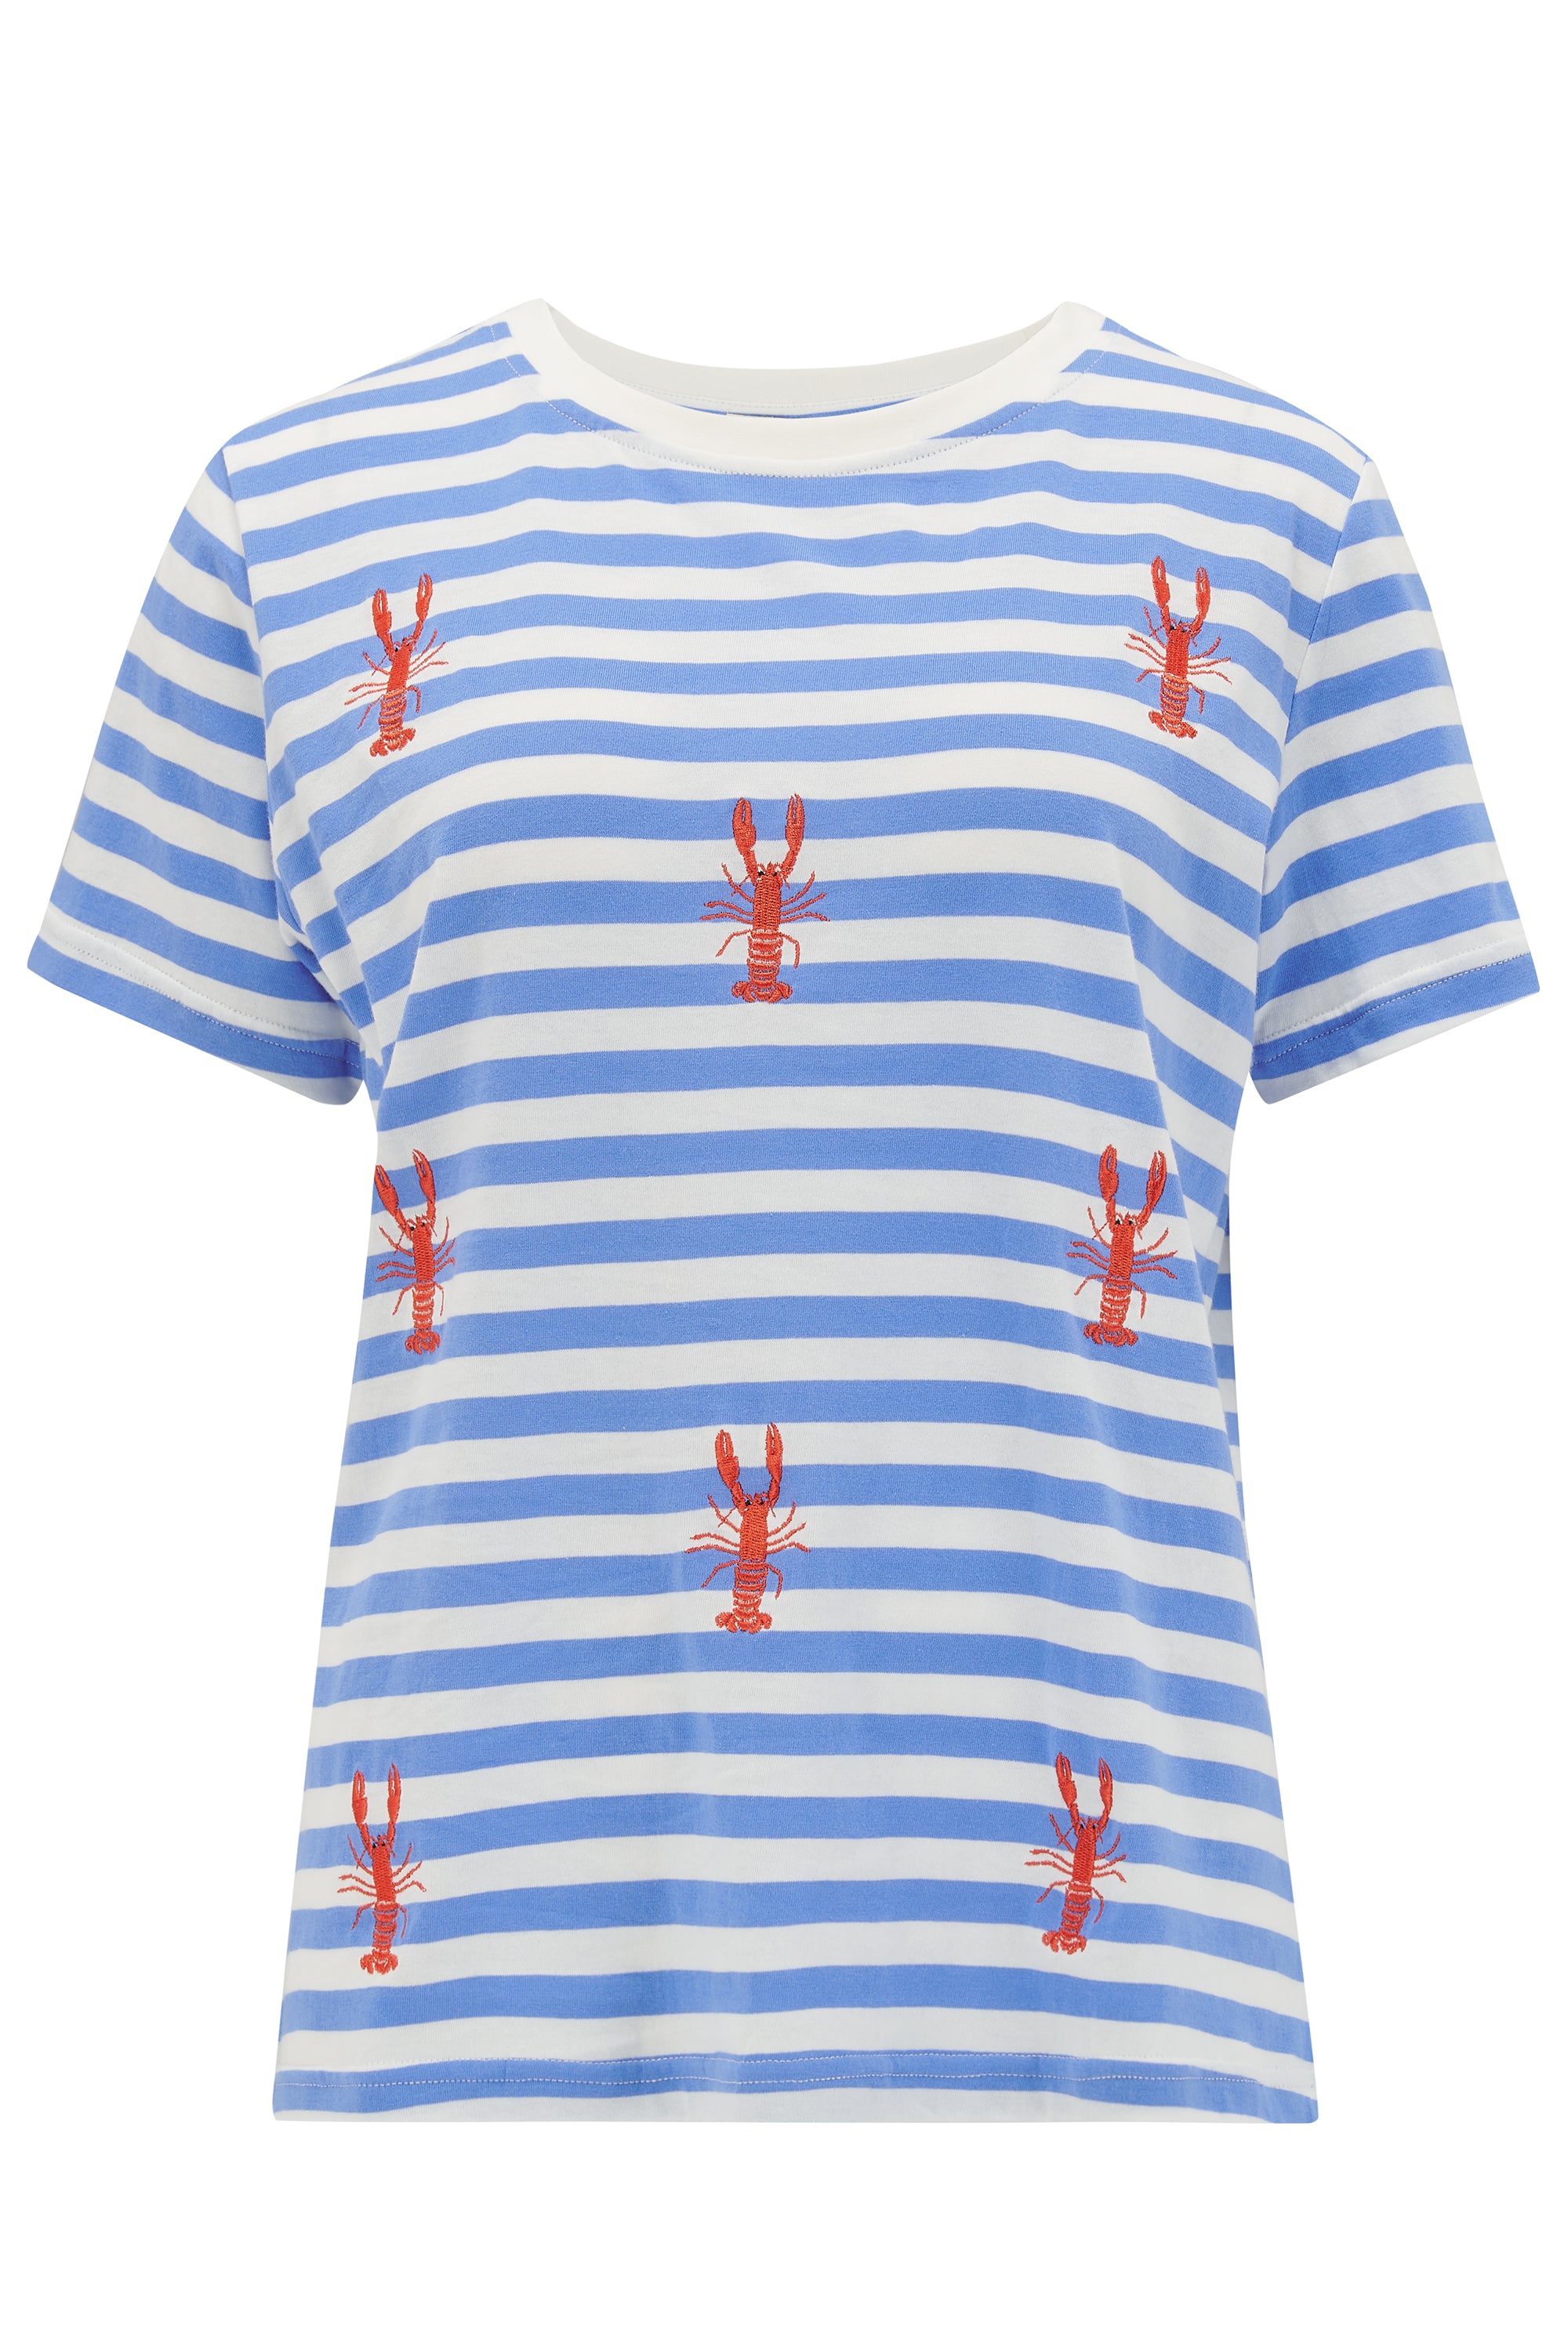 Maggie T-Shirt - Off-White/Blue, Lobster Embroidery